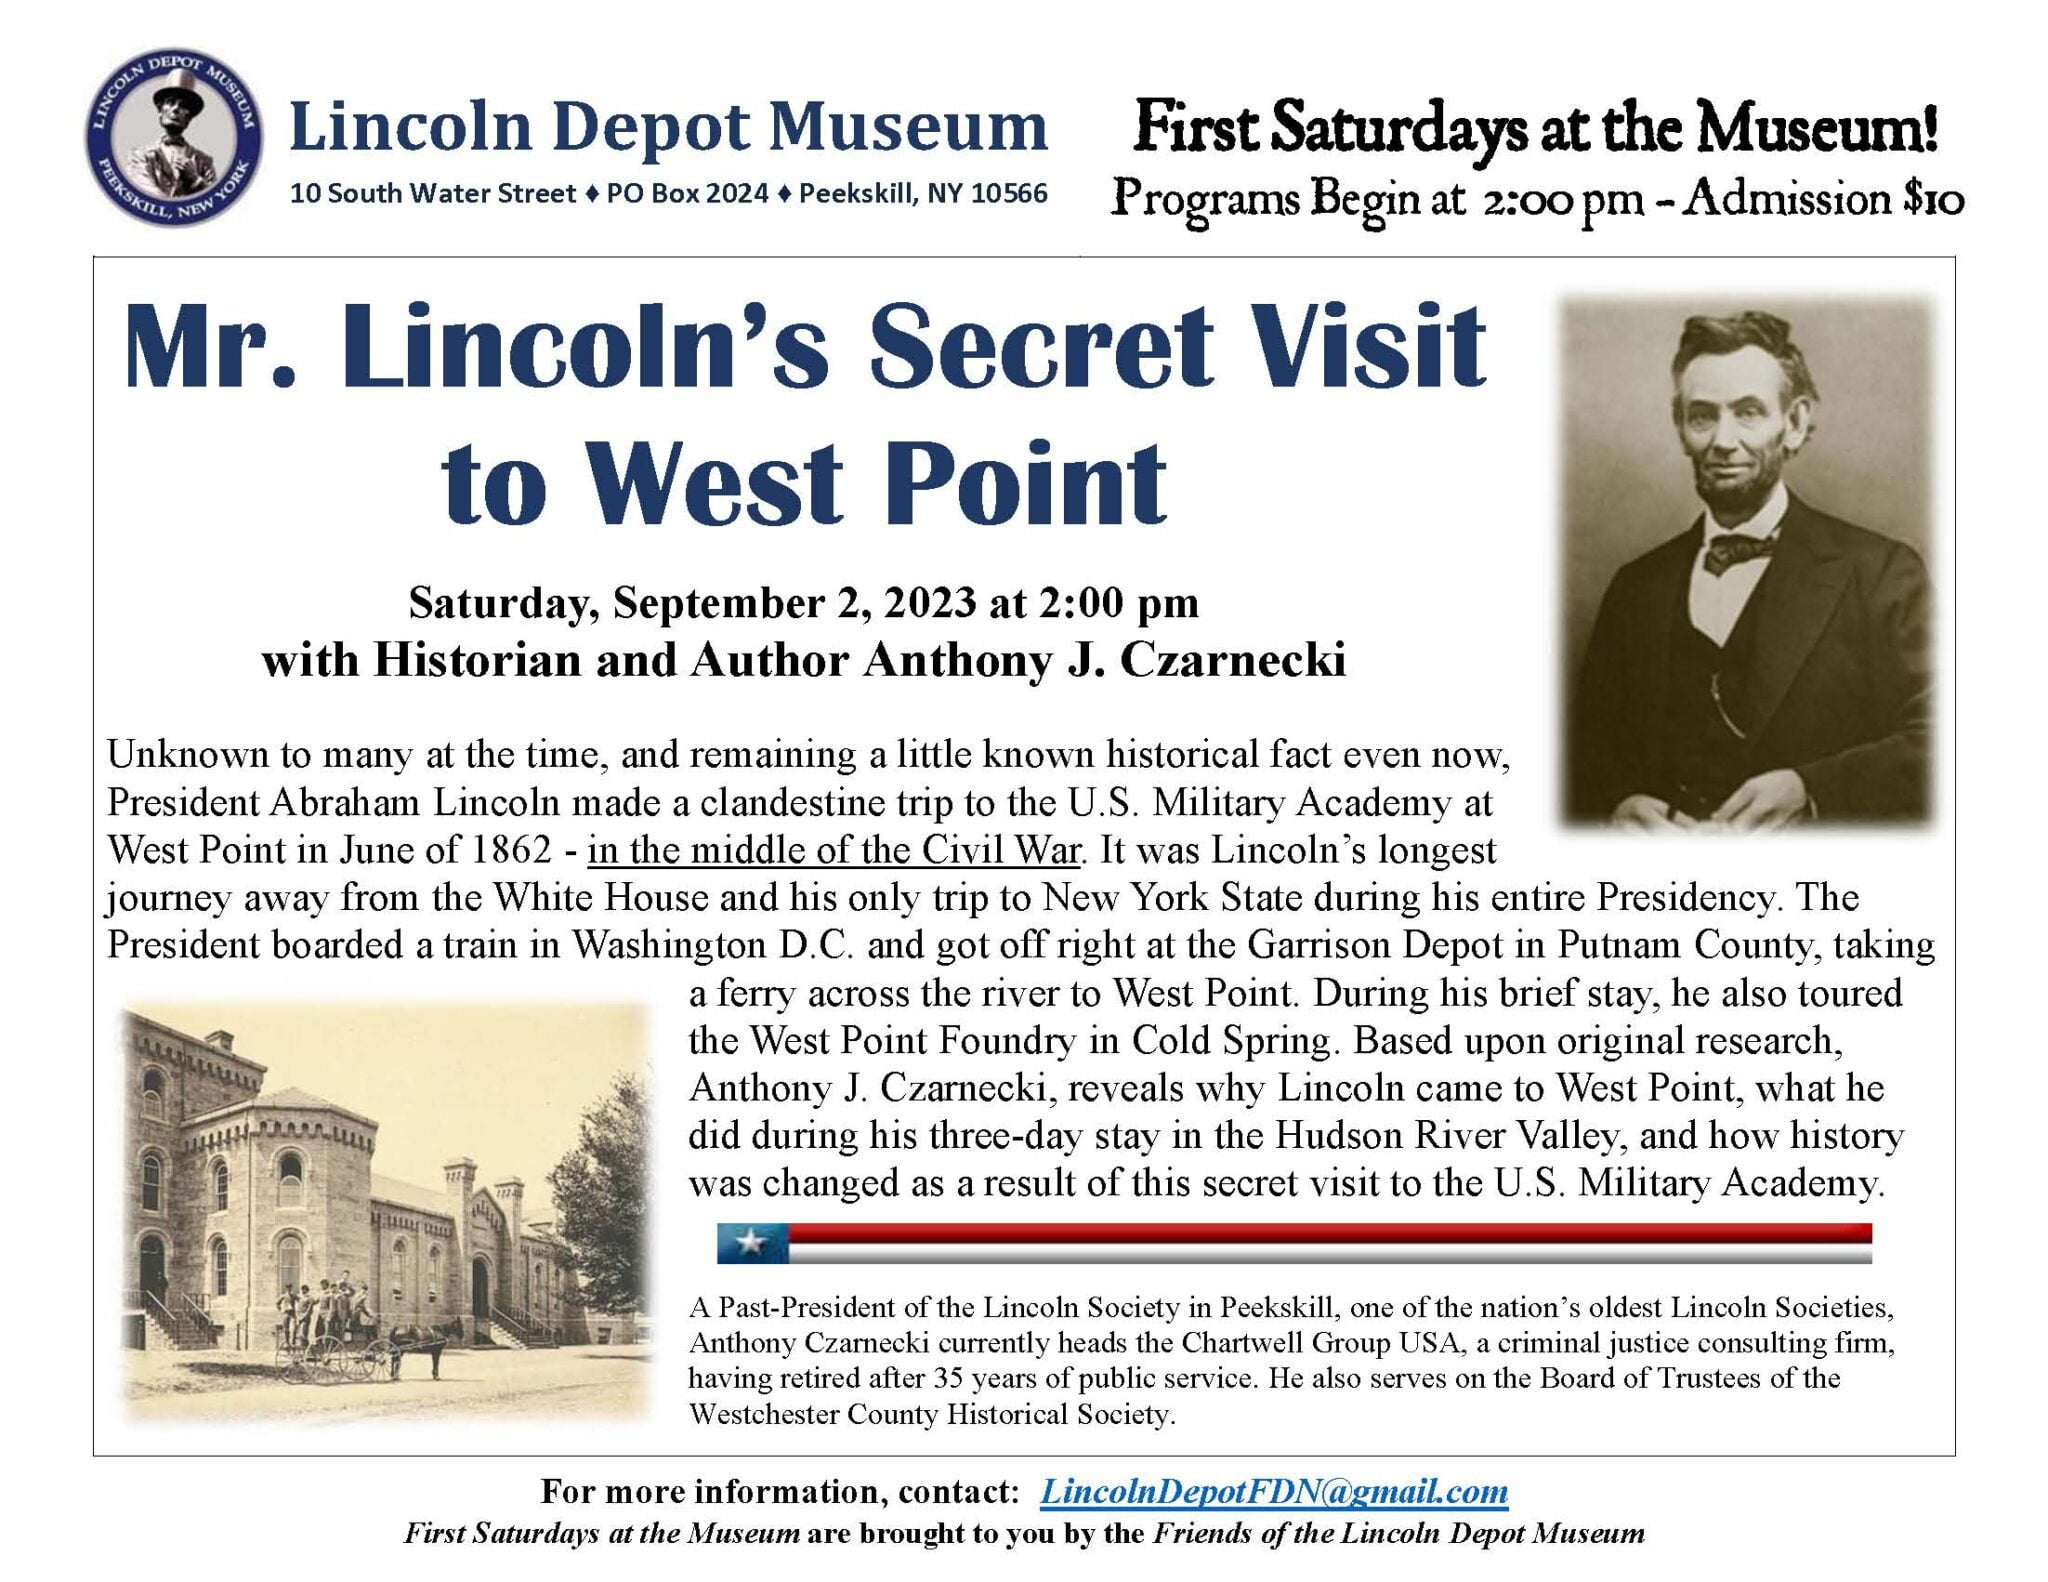 Flier for Lincoln's Secret Visit To West Point at the Lincoln Depot Museum